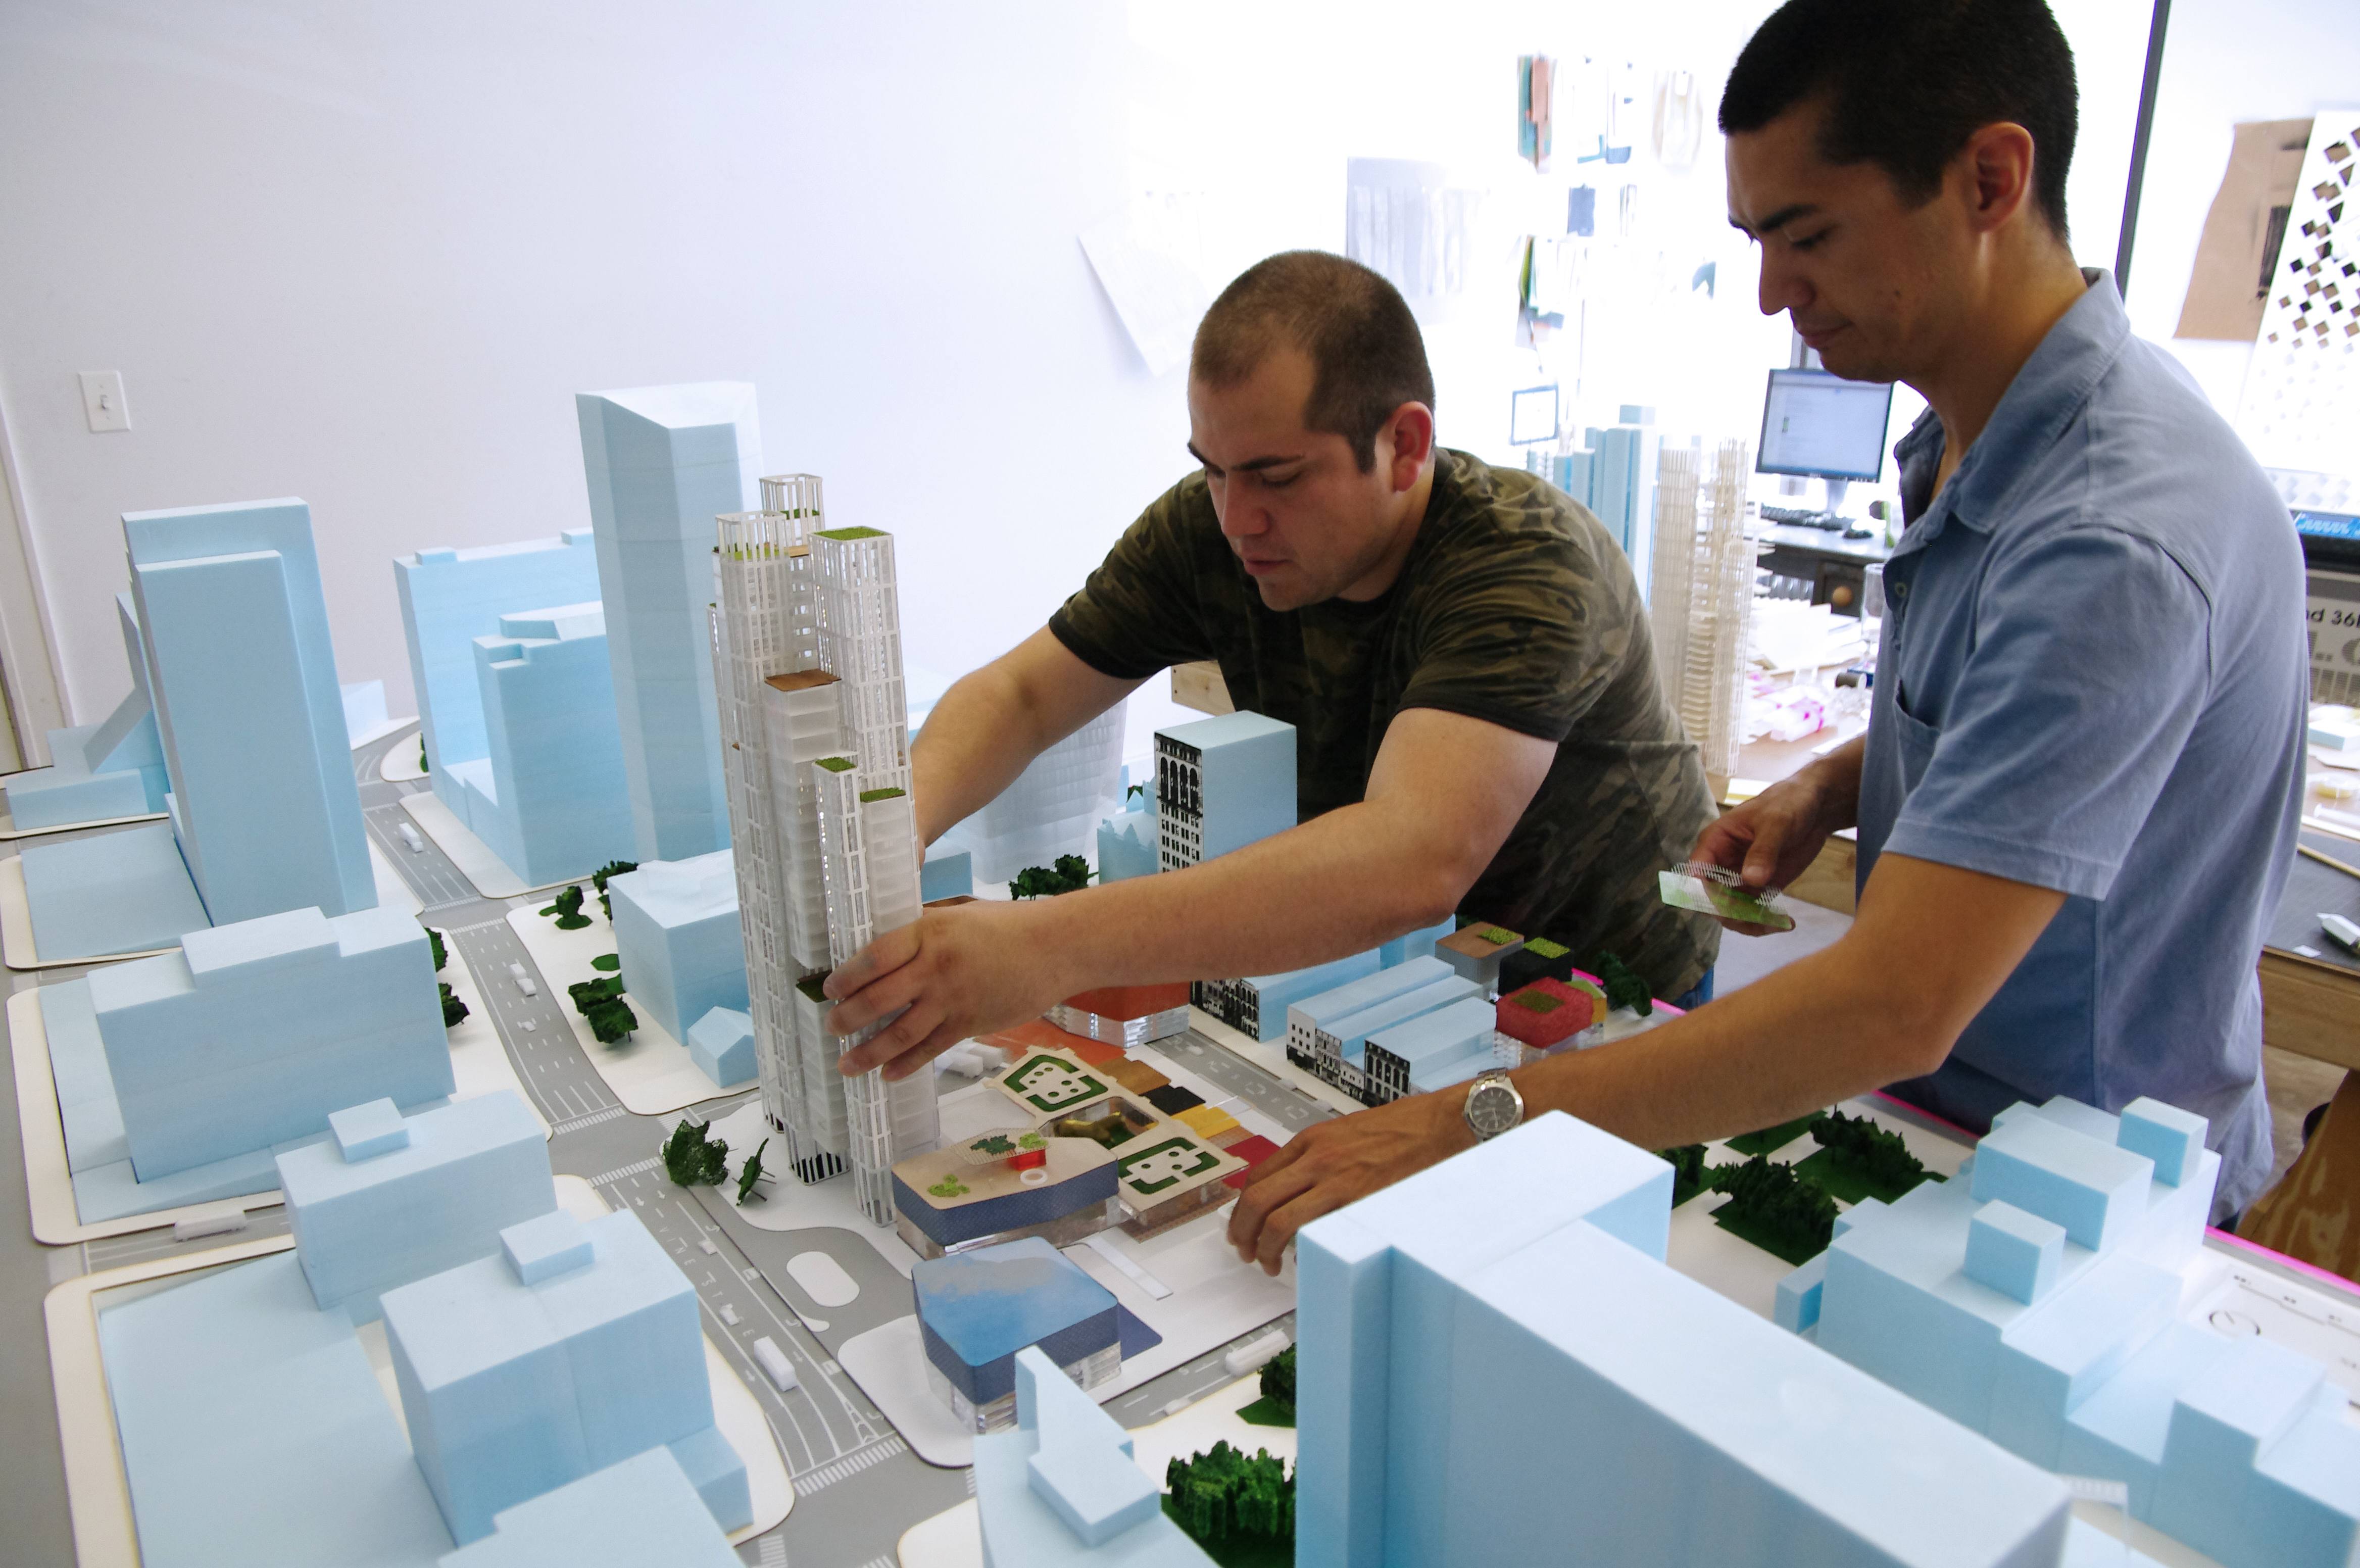 Professional Residency Student interacting with an architecture model while on his residency